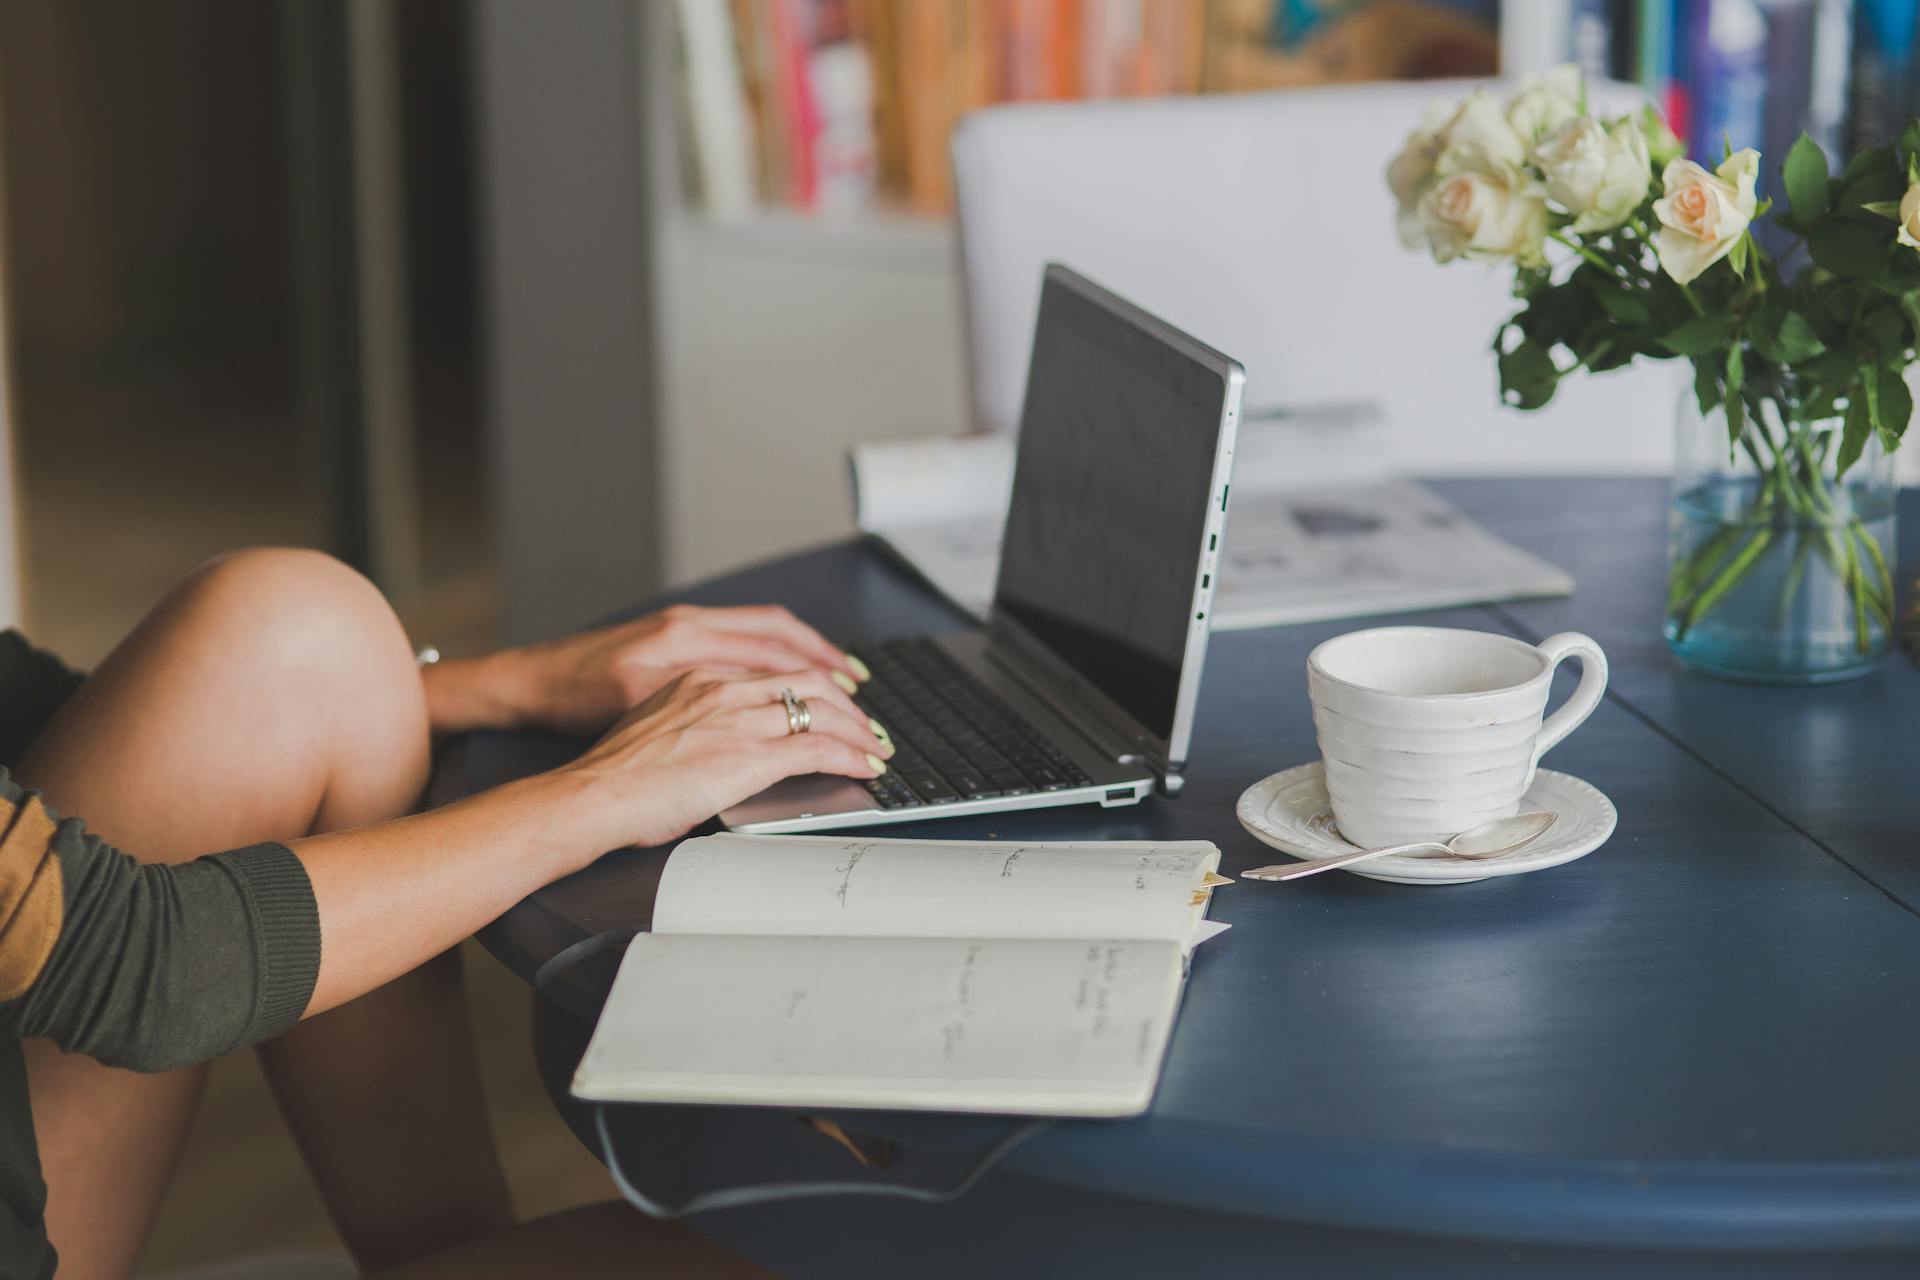 A woman using a laptop at home | Source: Pexels